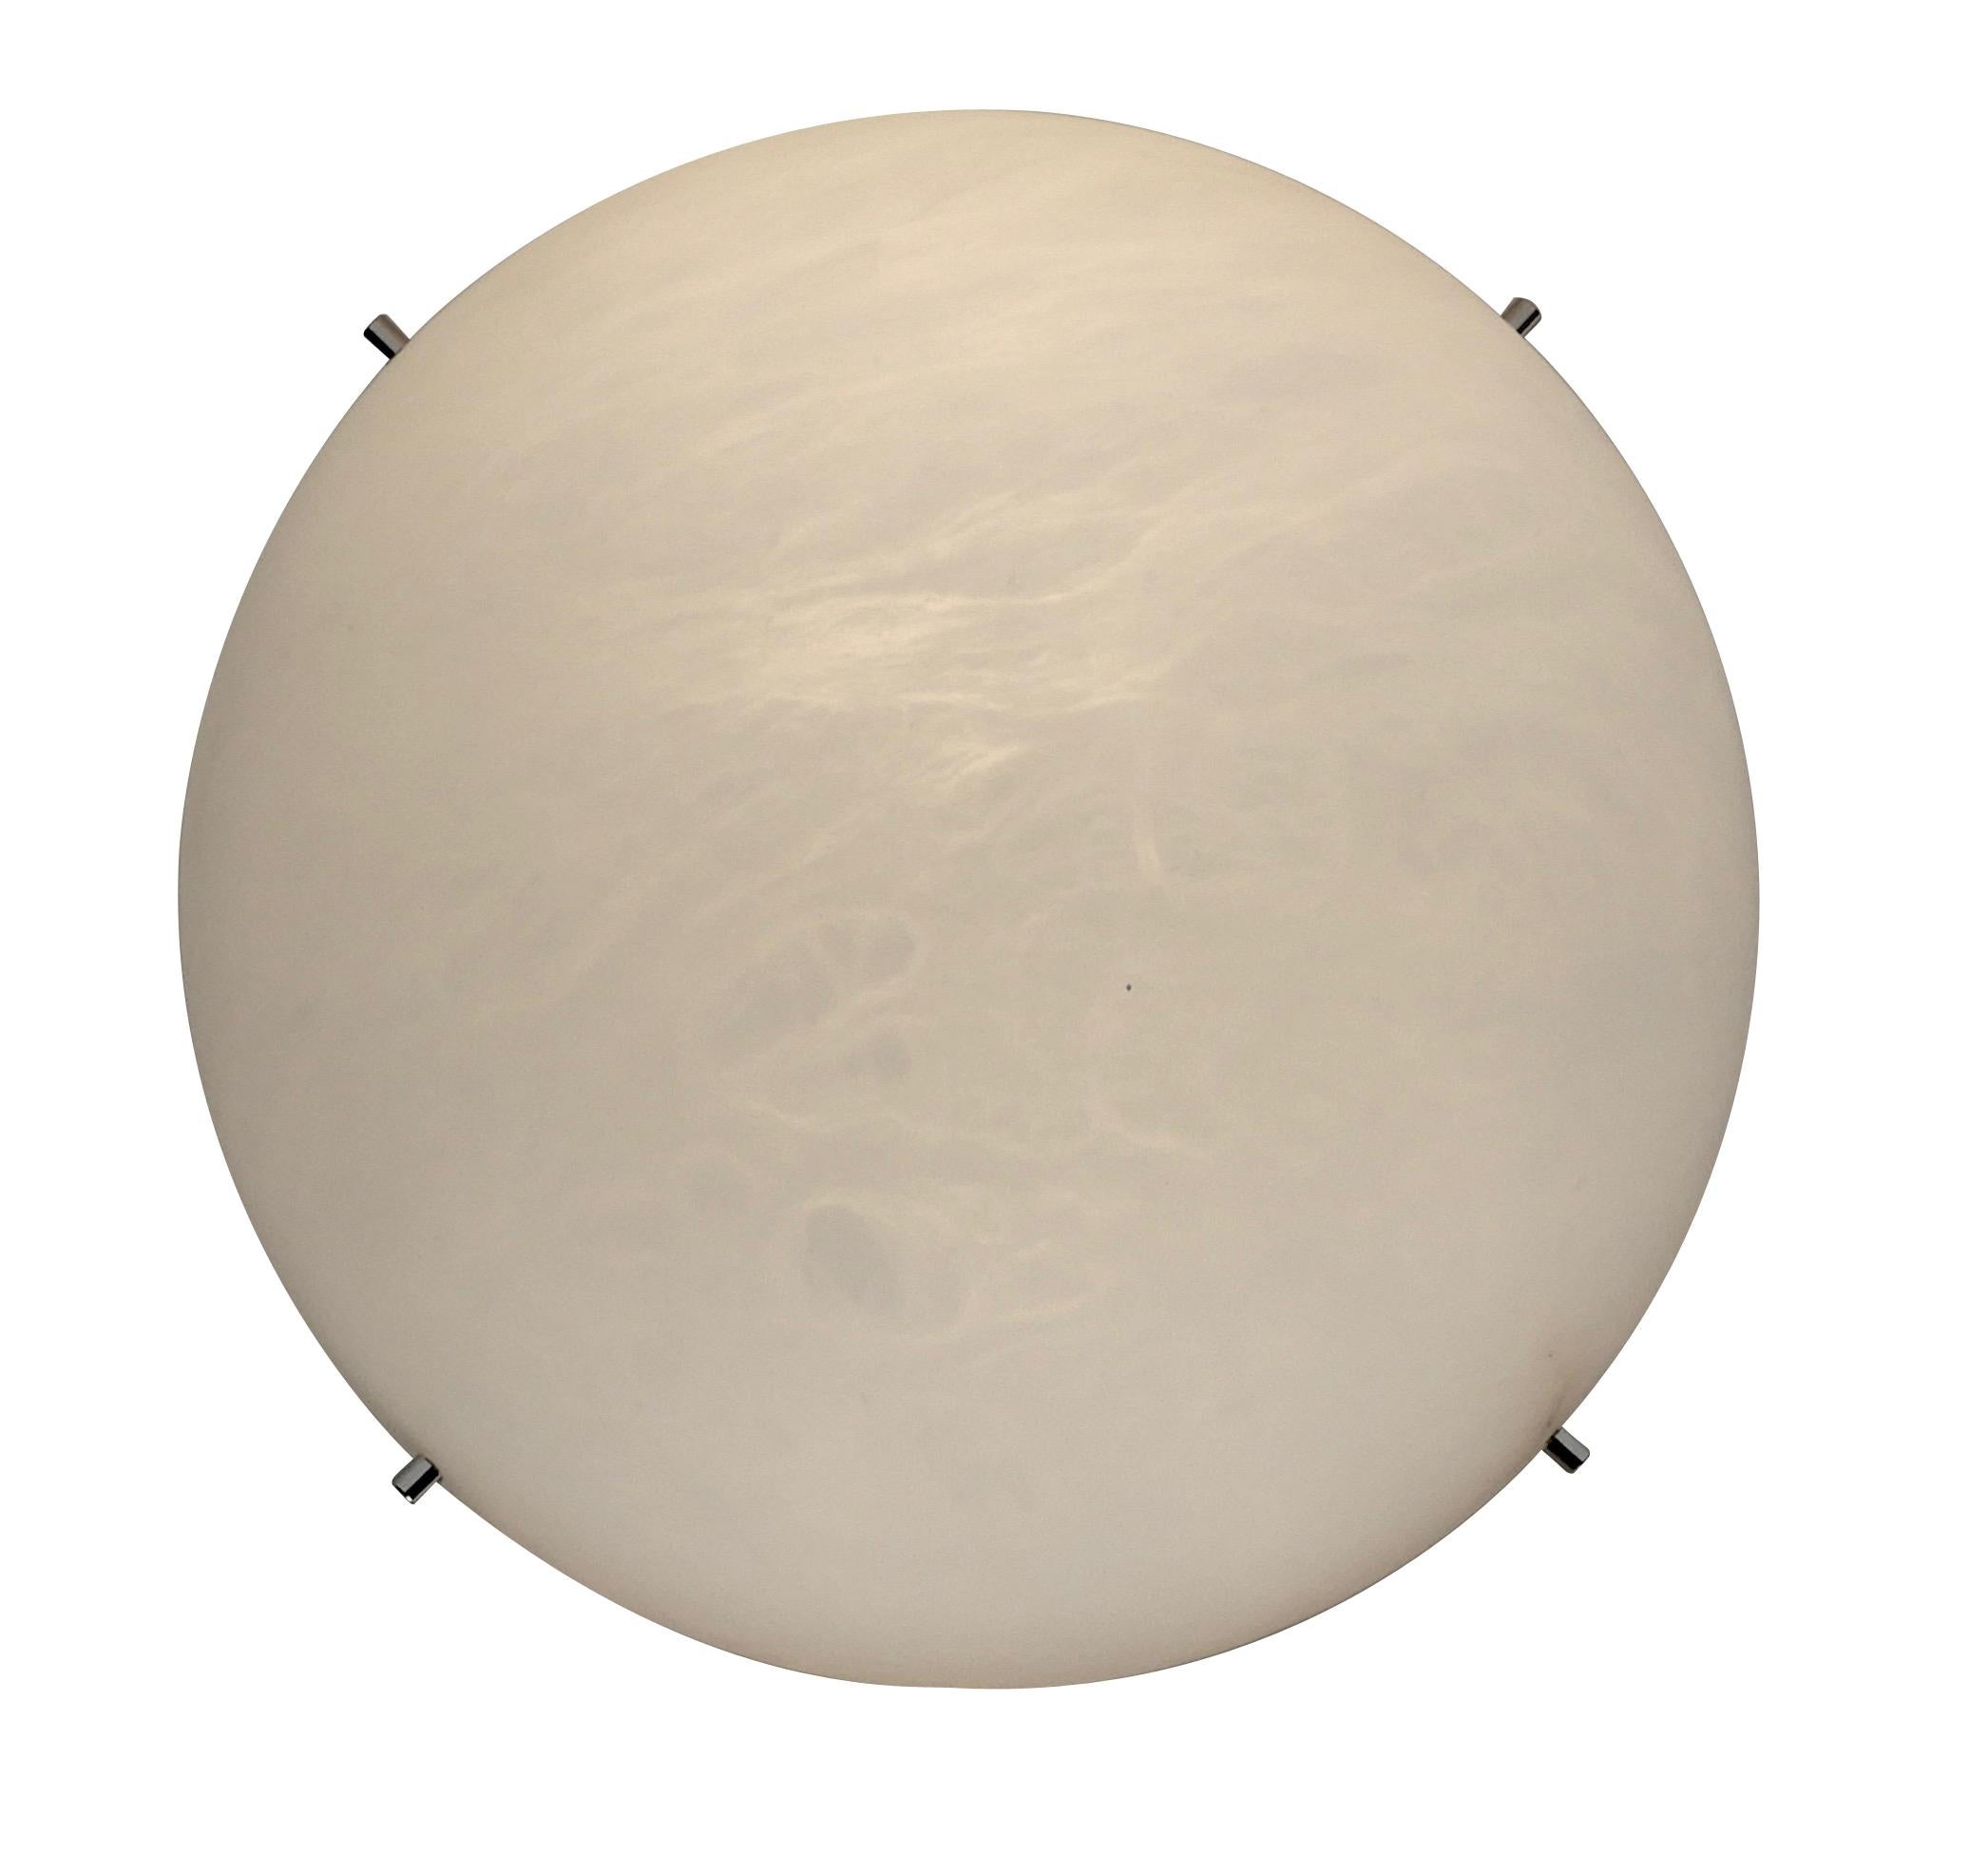 'Moon 4' Alabaster wall or ceiling lamp in the manner of Pierre Chareau. Handcrafted in Los Angeles in the workshop of noted French designer and antiques dealer Denis de le Mesiere, who meticulously pays homage to the work of Pierre Chareau with